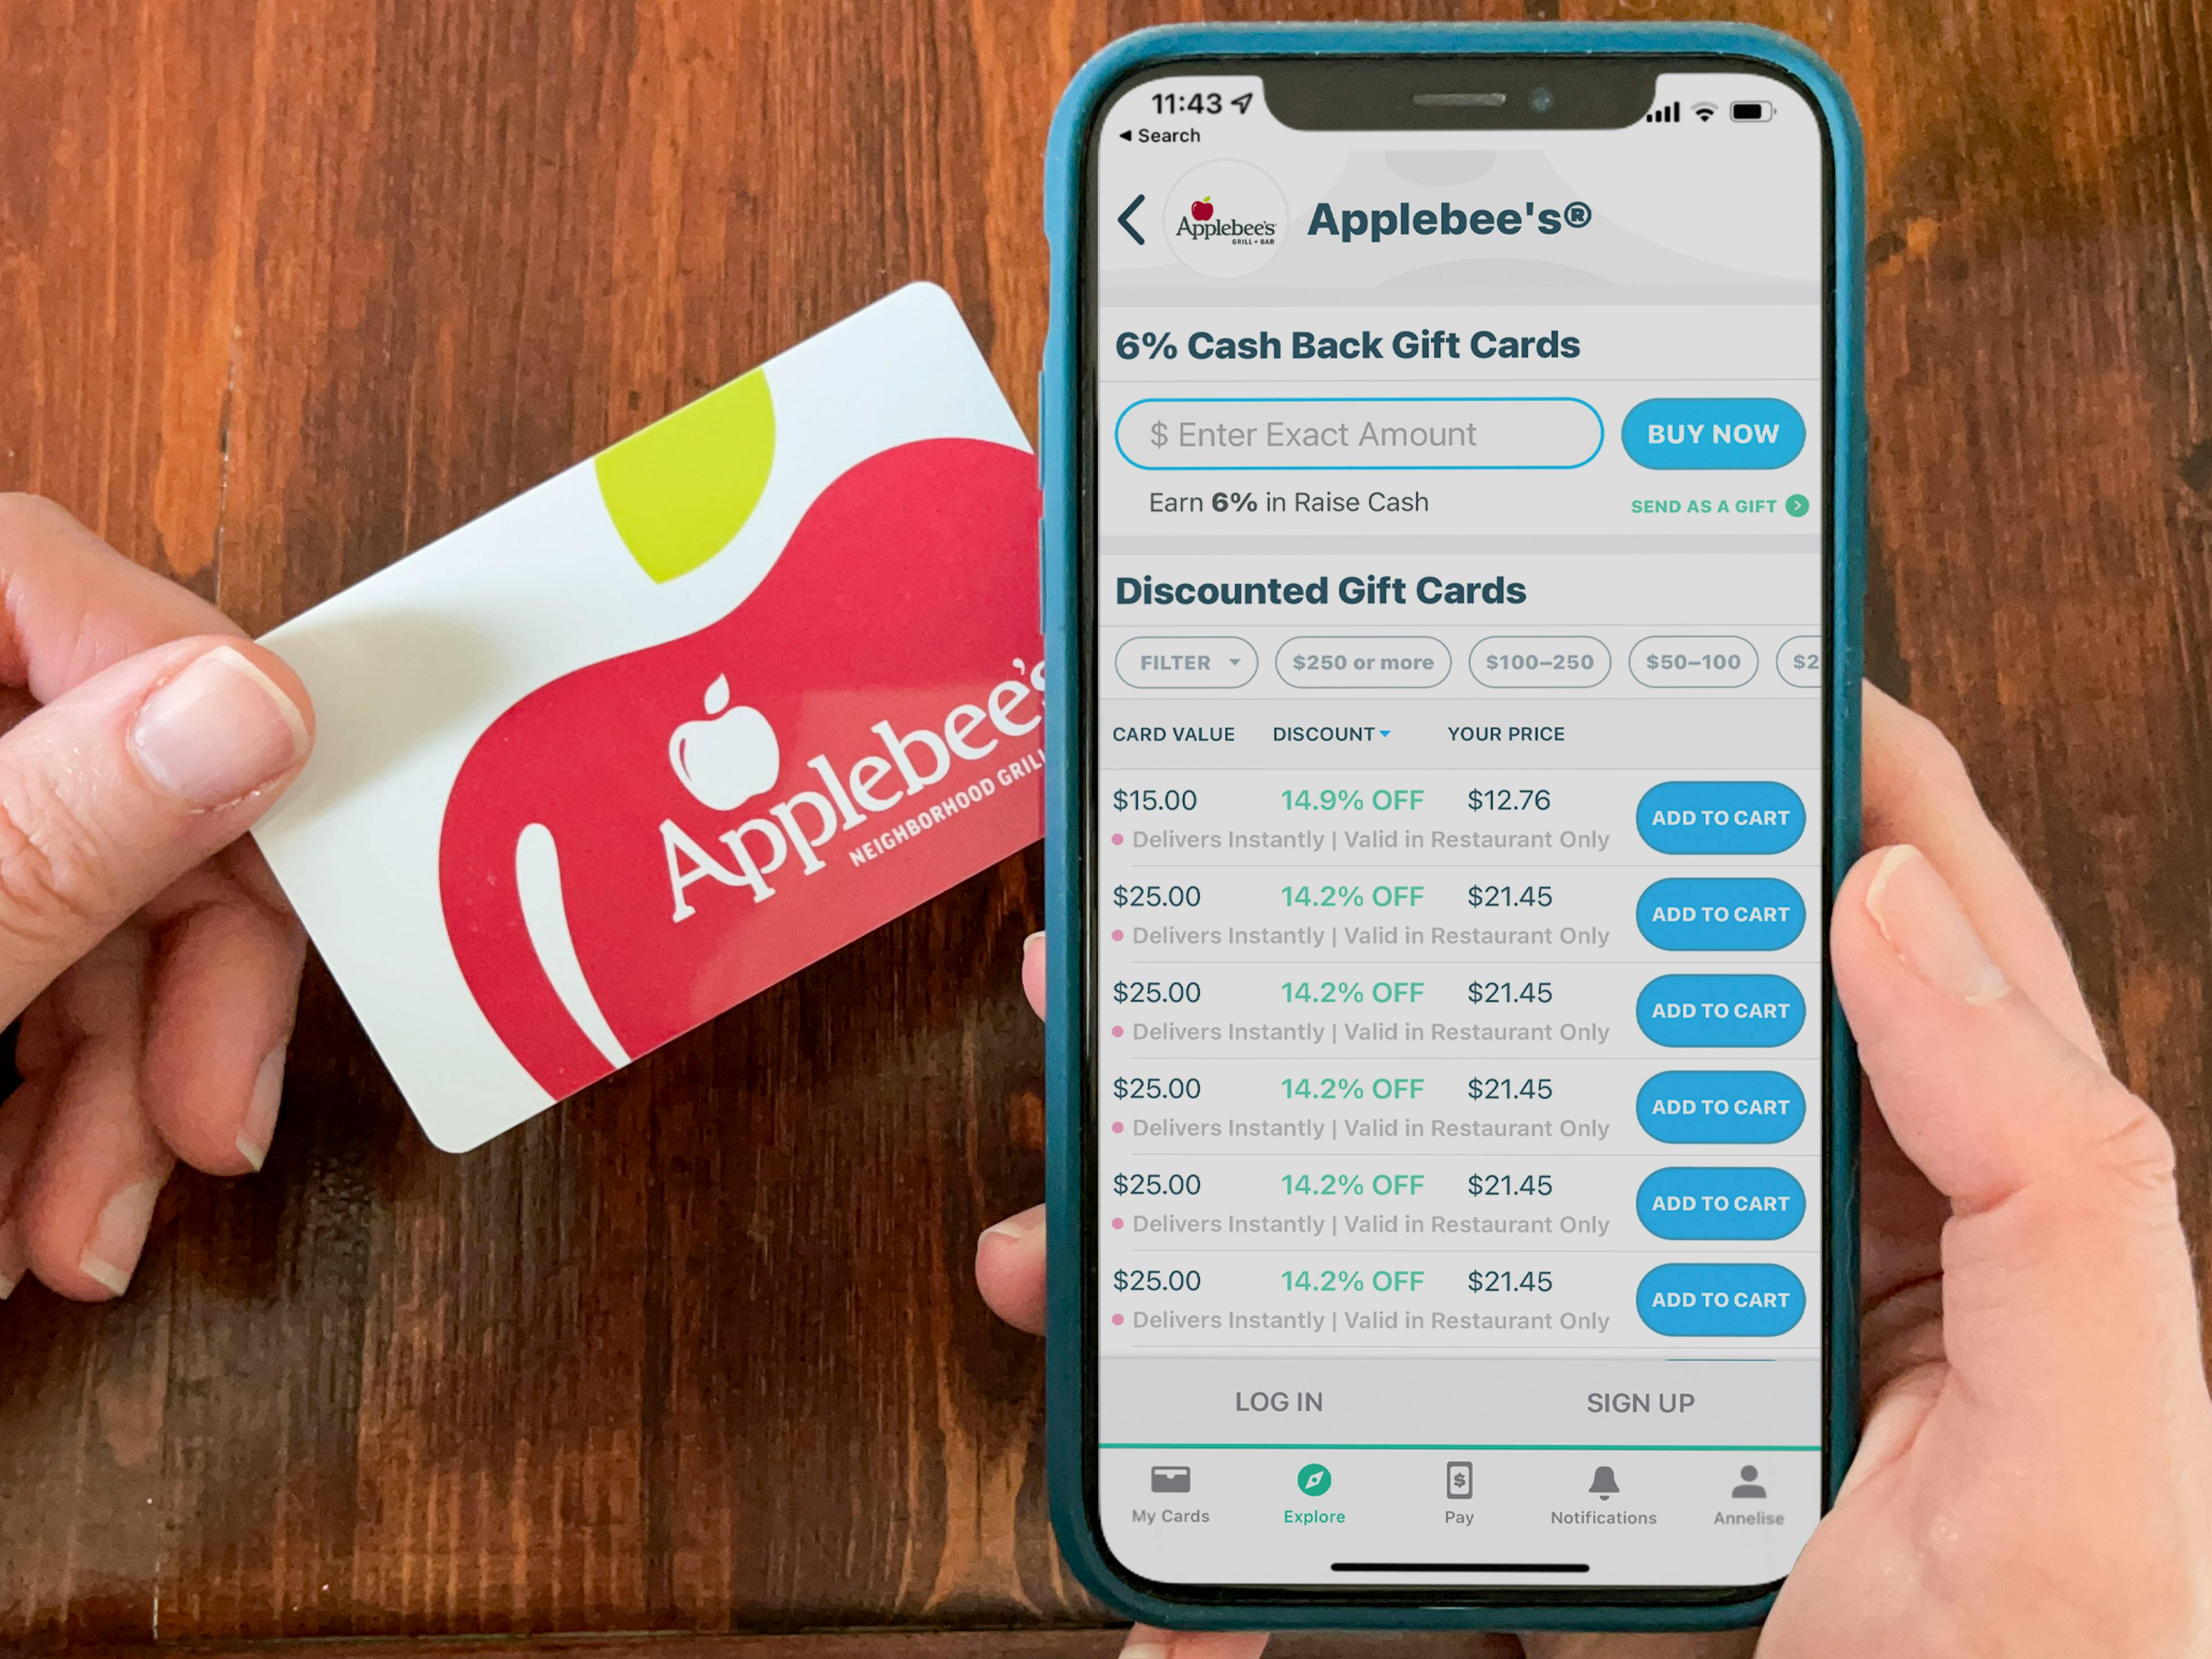 A person's hands, one holding an iPhone displaying the Raise.com mobile app's page for Applebee's gift cards, and the other holding an Applebee's gift card.